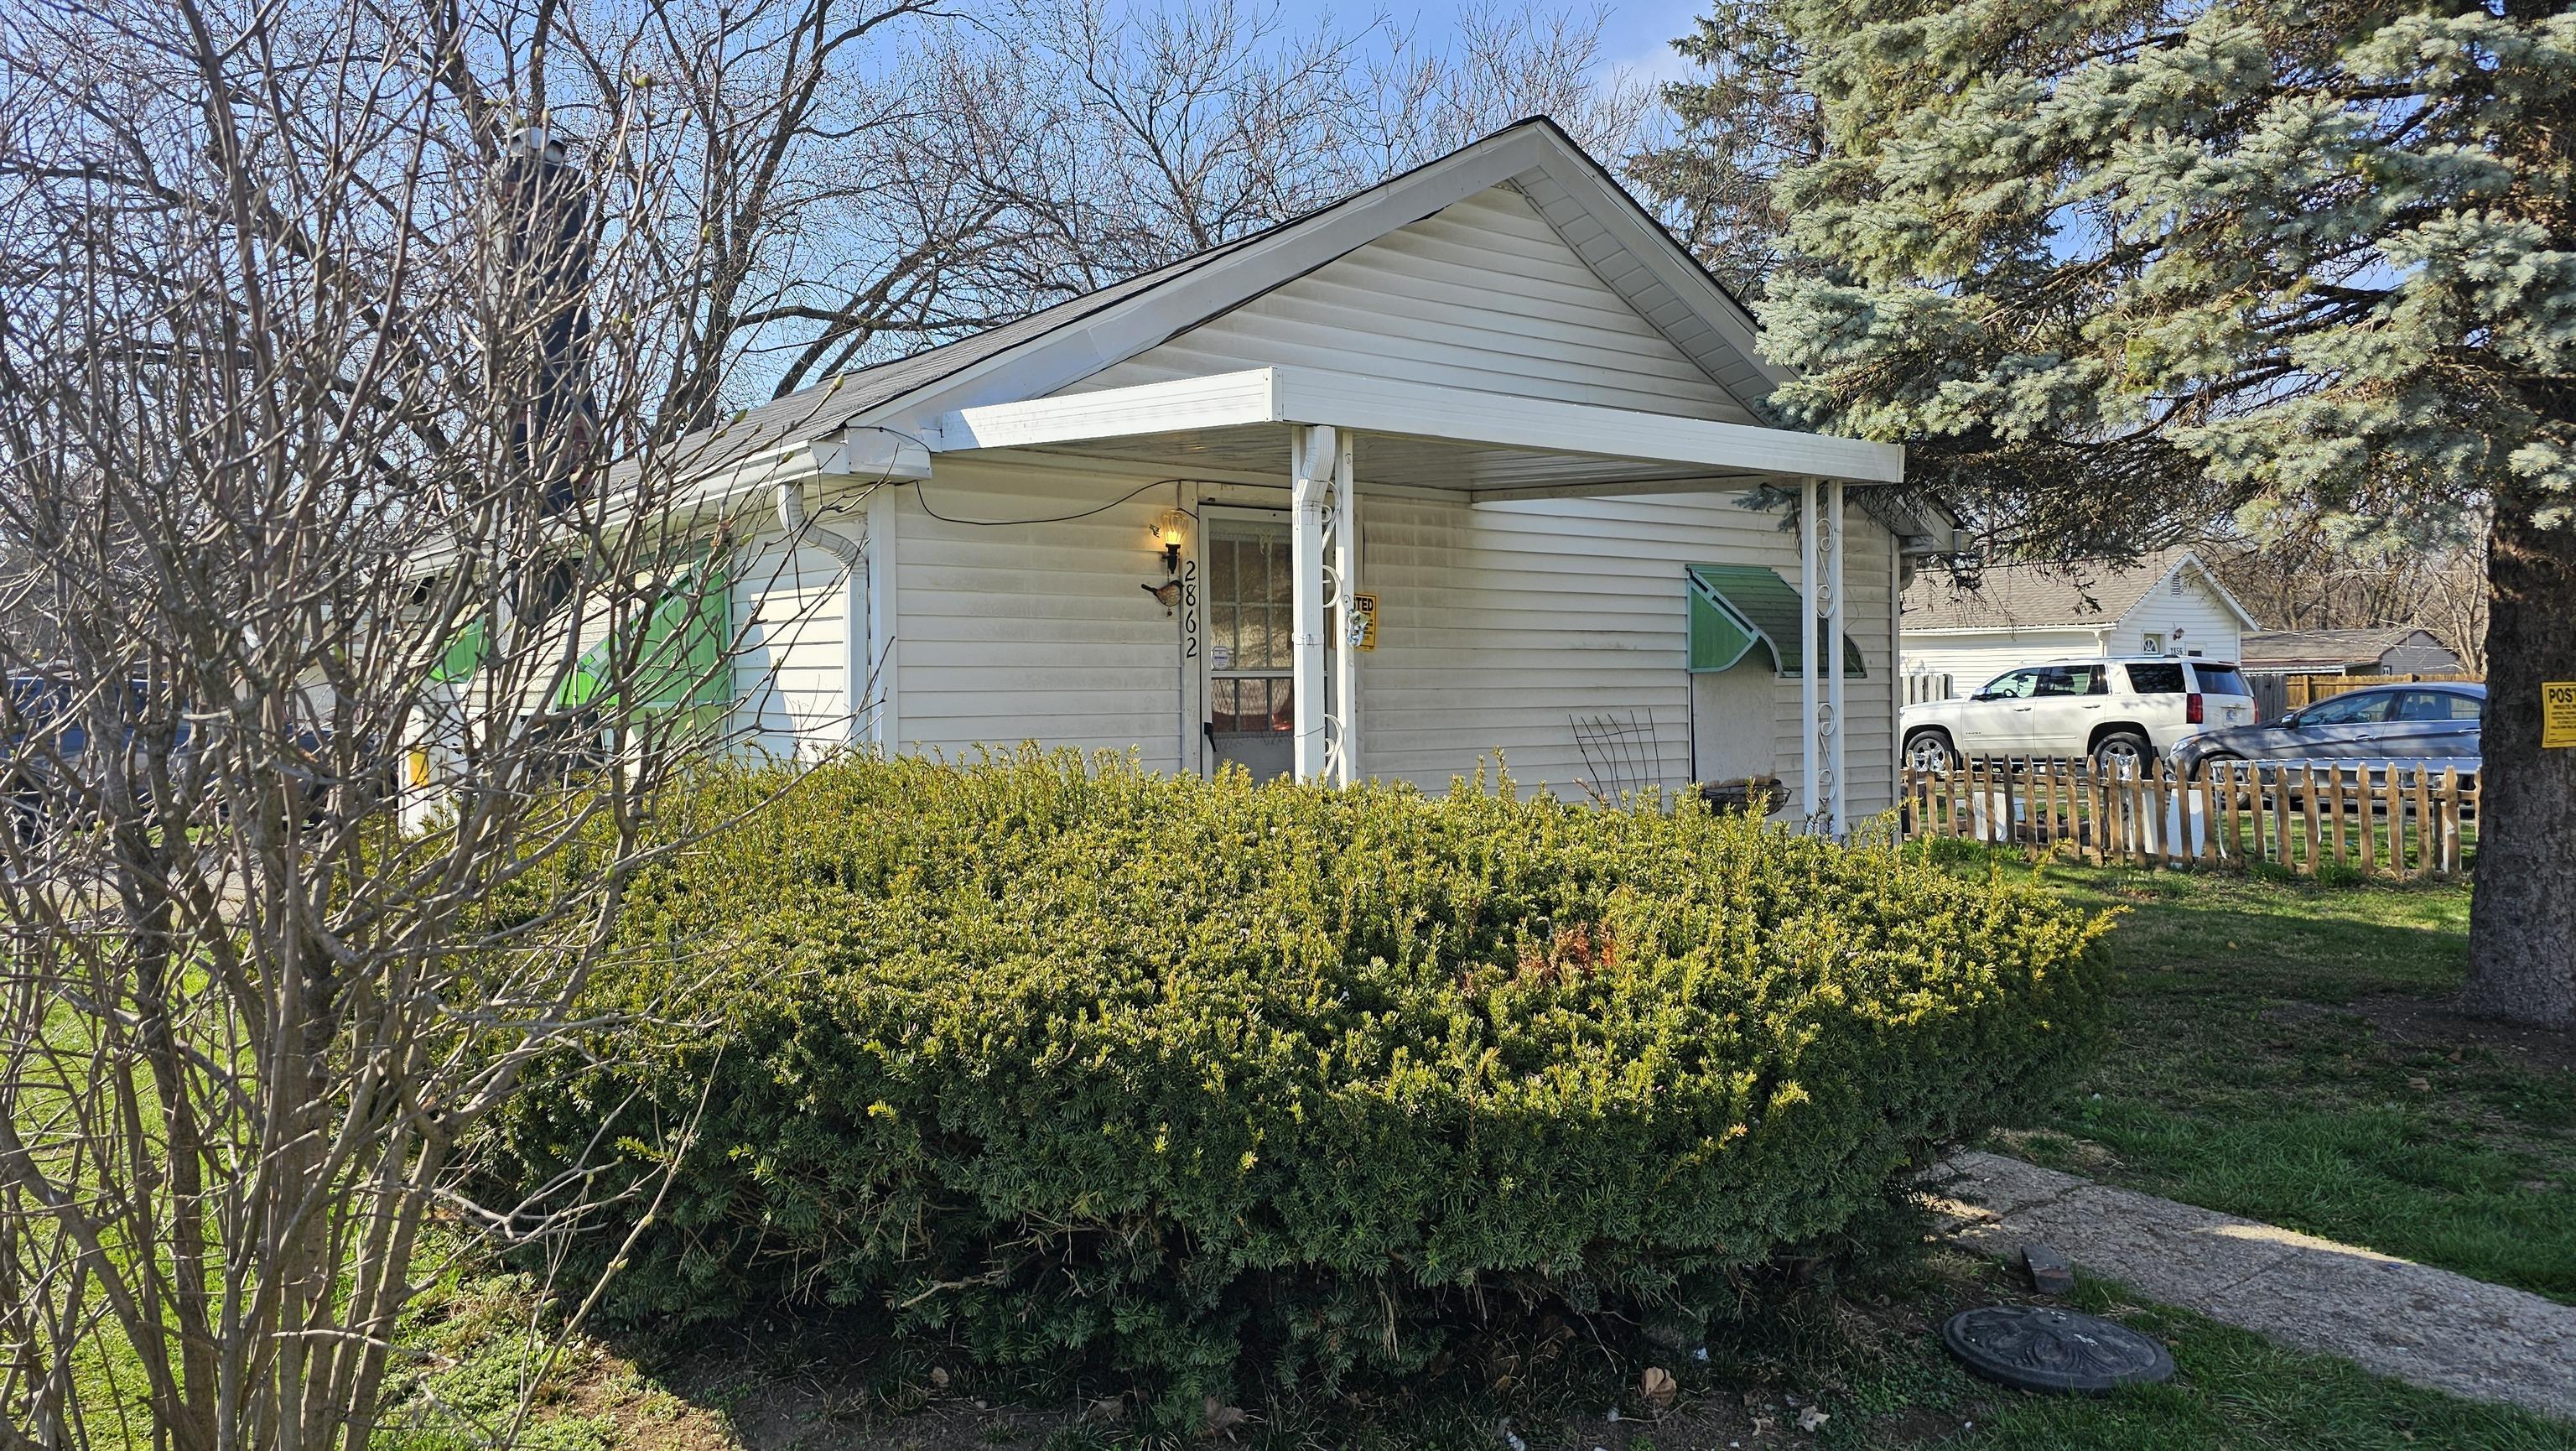 Photo one of 2862 Collier St Indianapolis IN 46241 | MLS 21968186